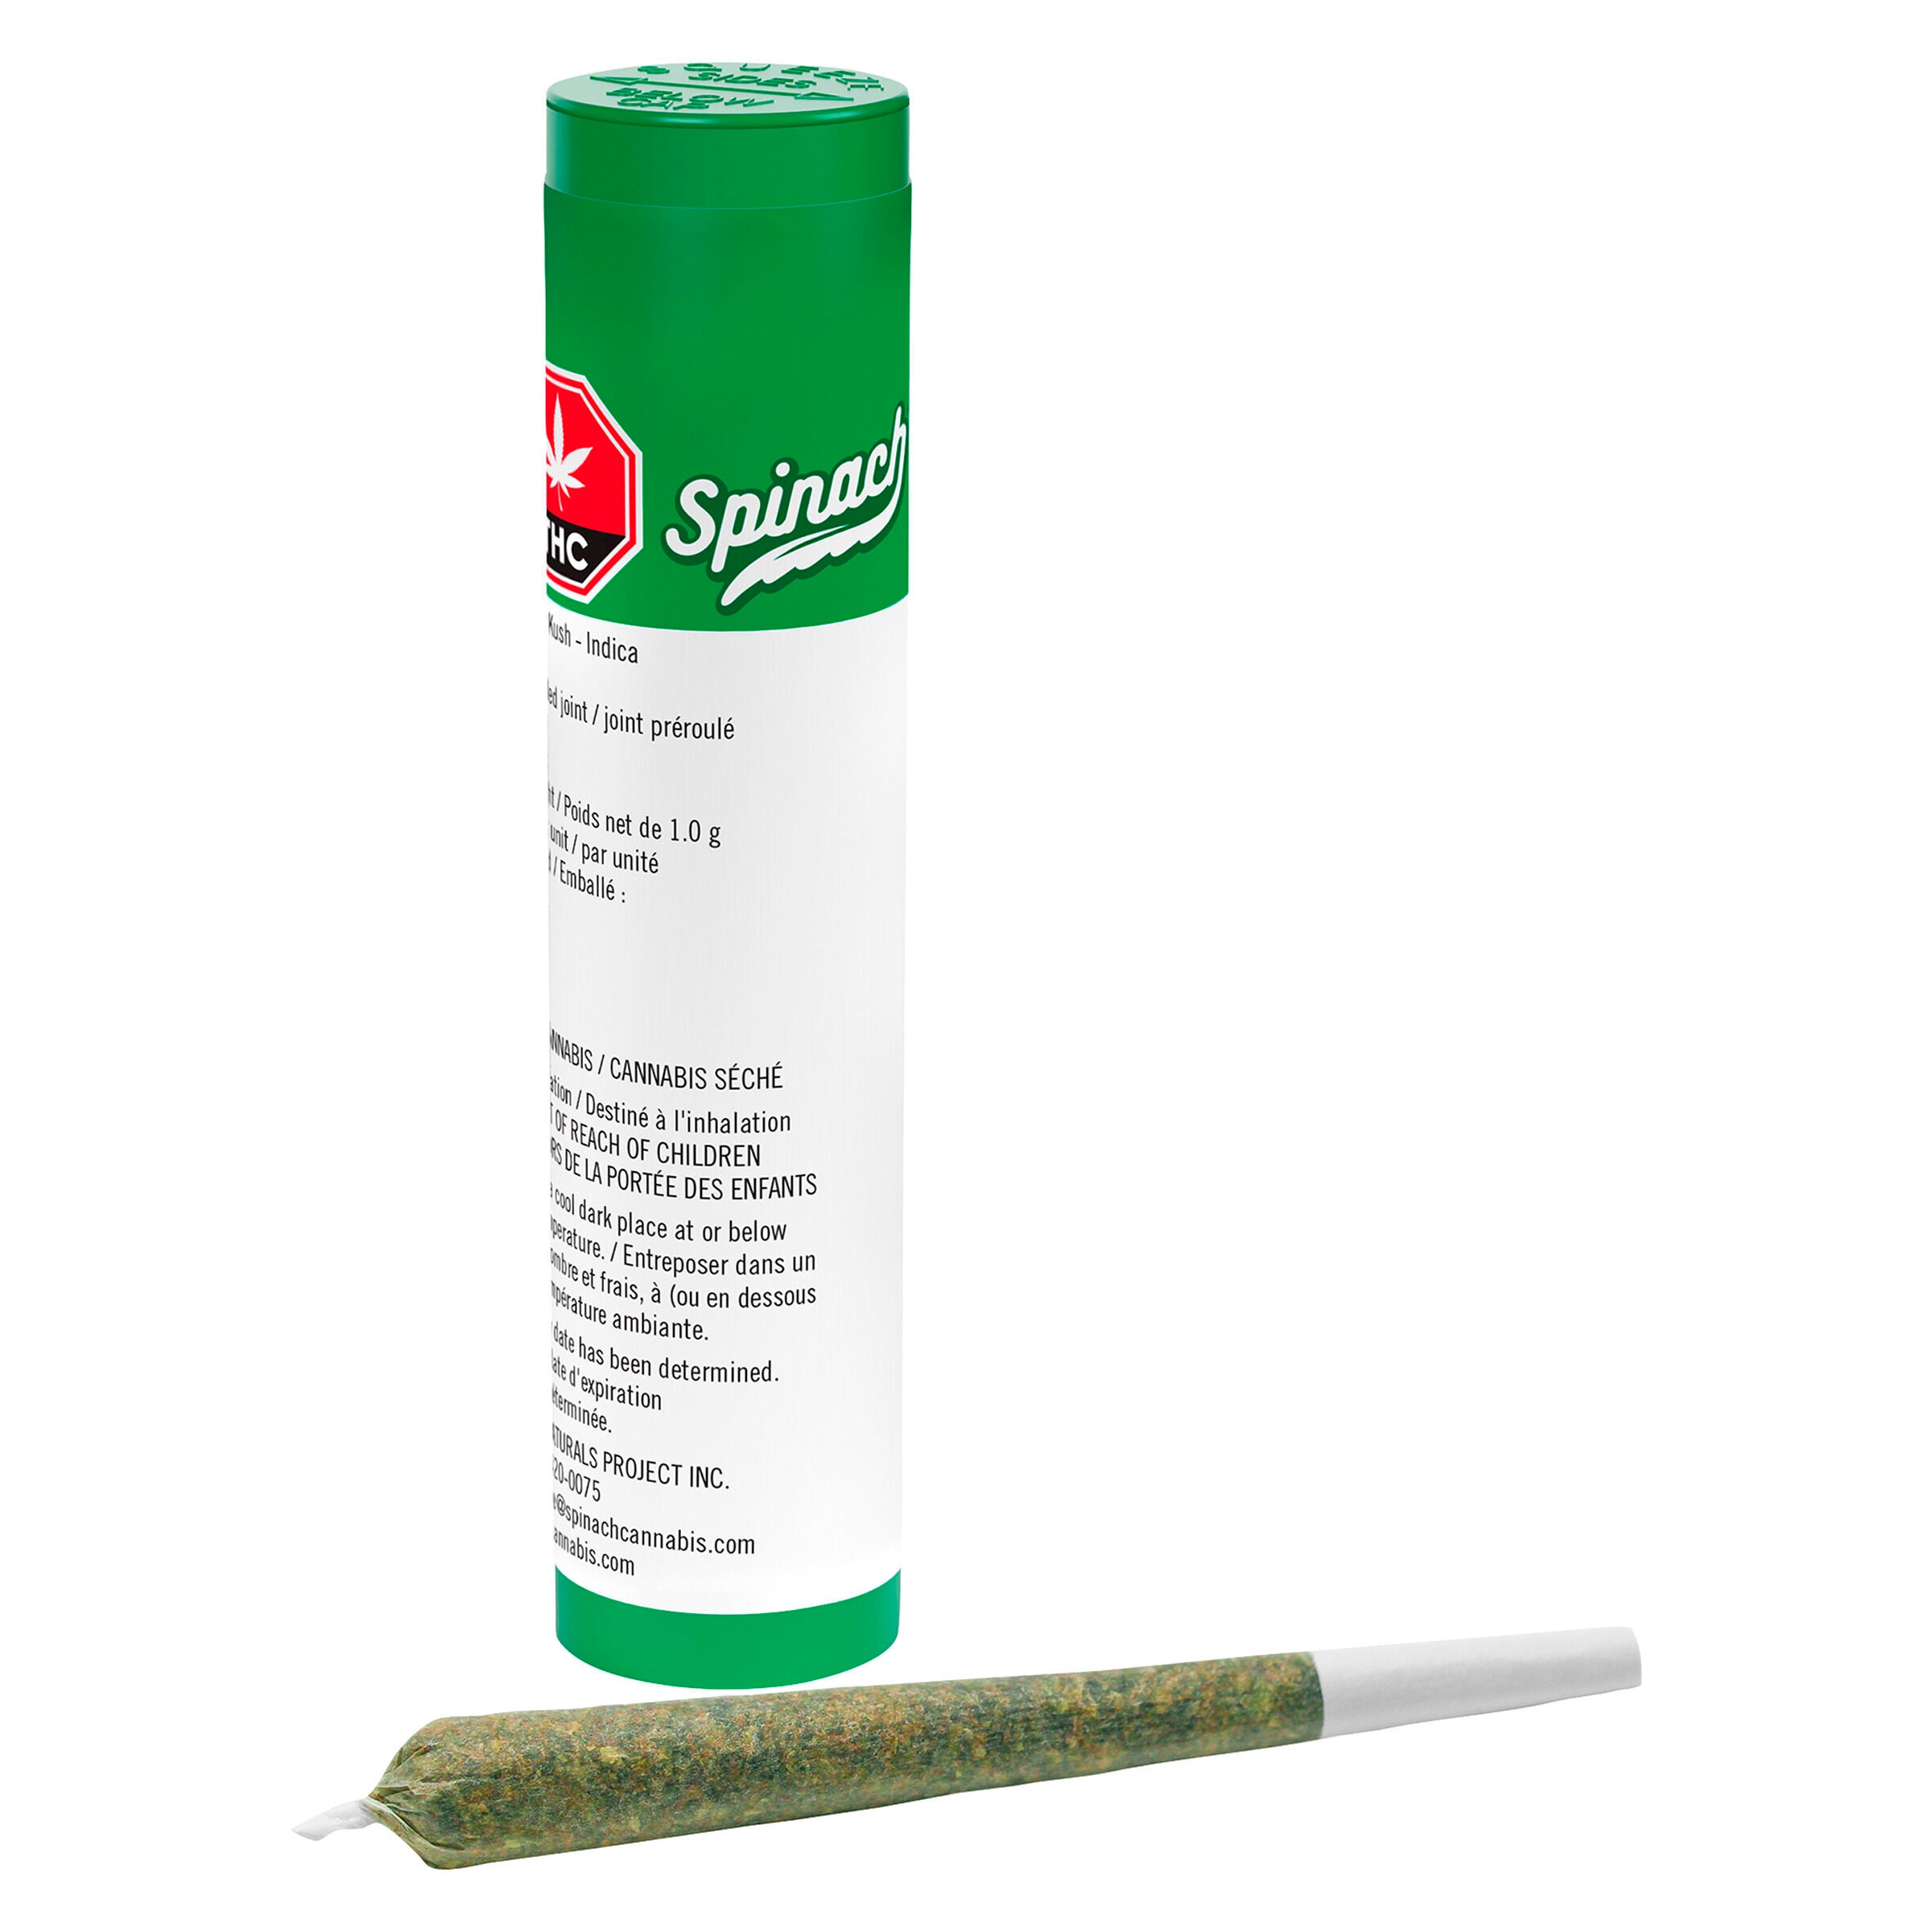 Cannabis Product Rockstar Kush Pre-Roll by Spinach - 4